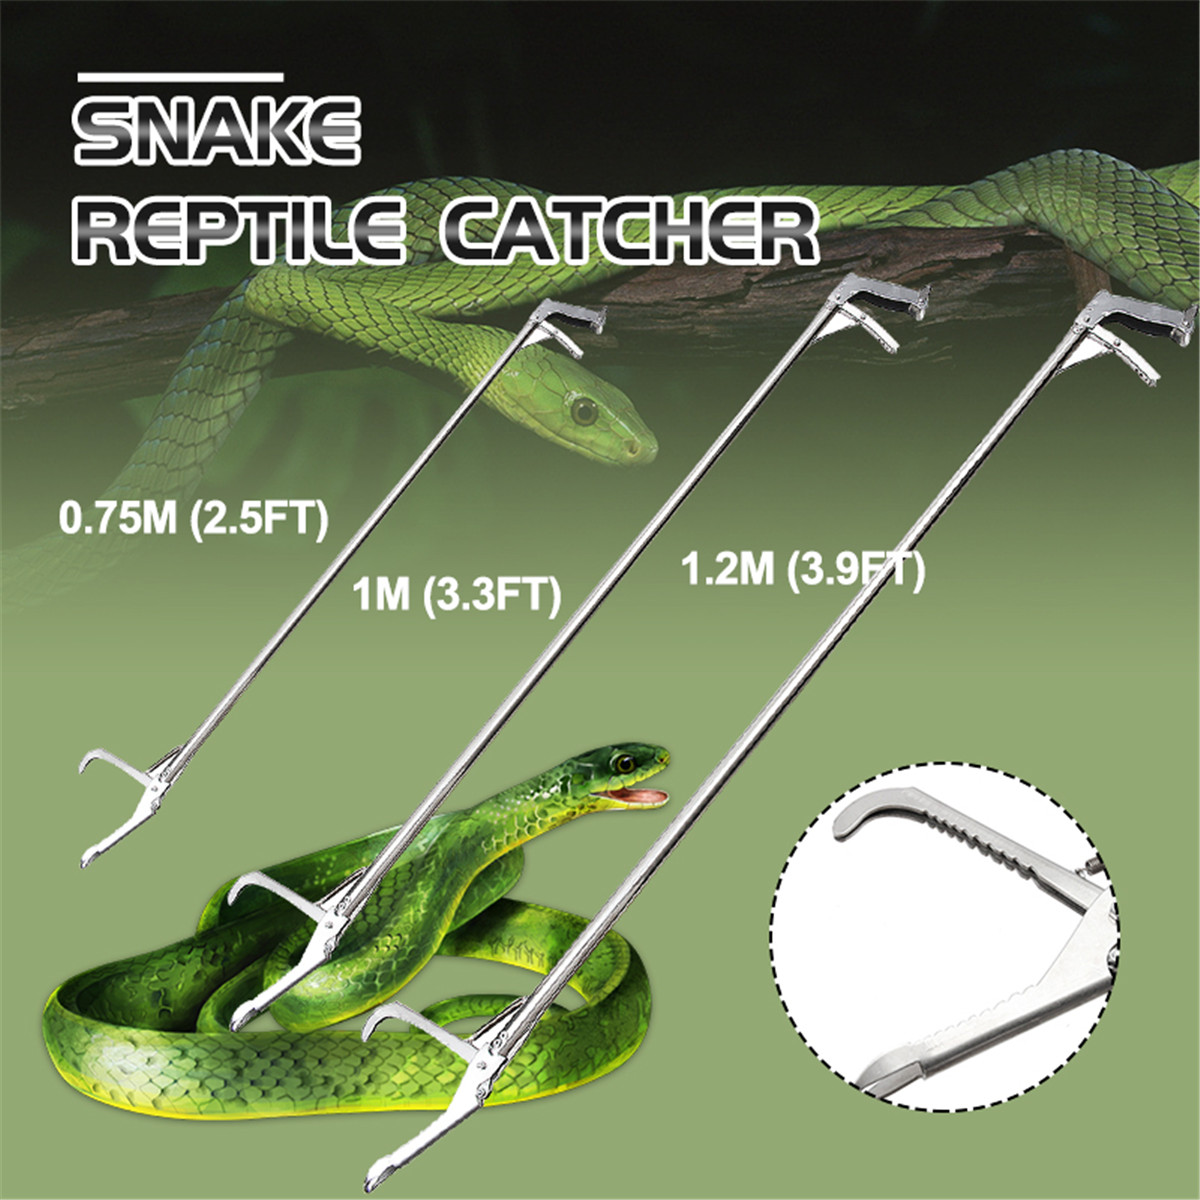 Quickly Reptile Snake Catcher Tongs Stick 120CM/100/75 Professional Stainless Steel Pest Control Product Grabber Wide Jaw Tool